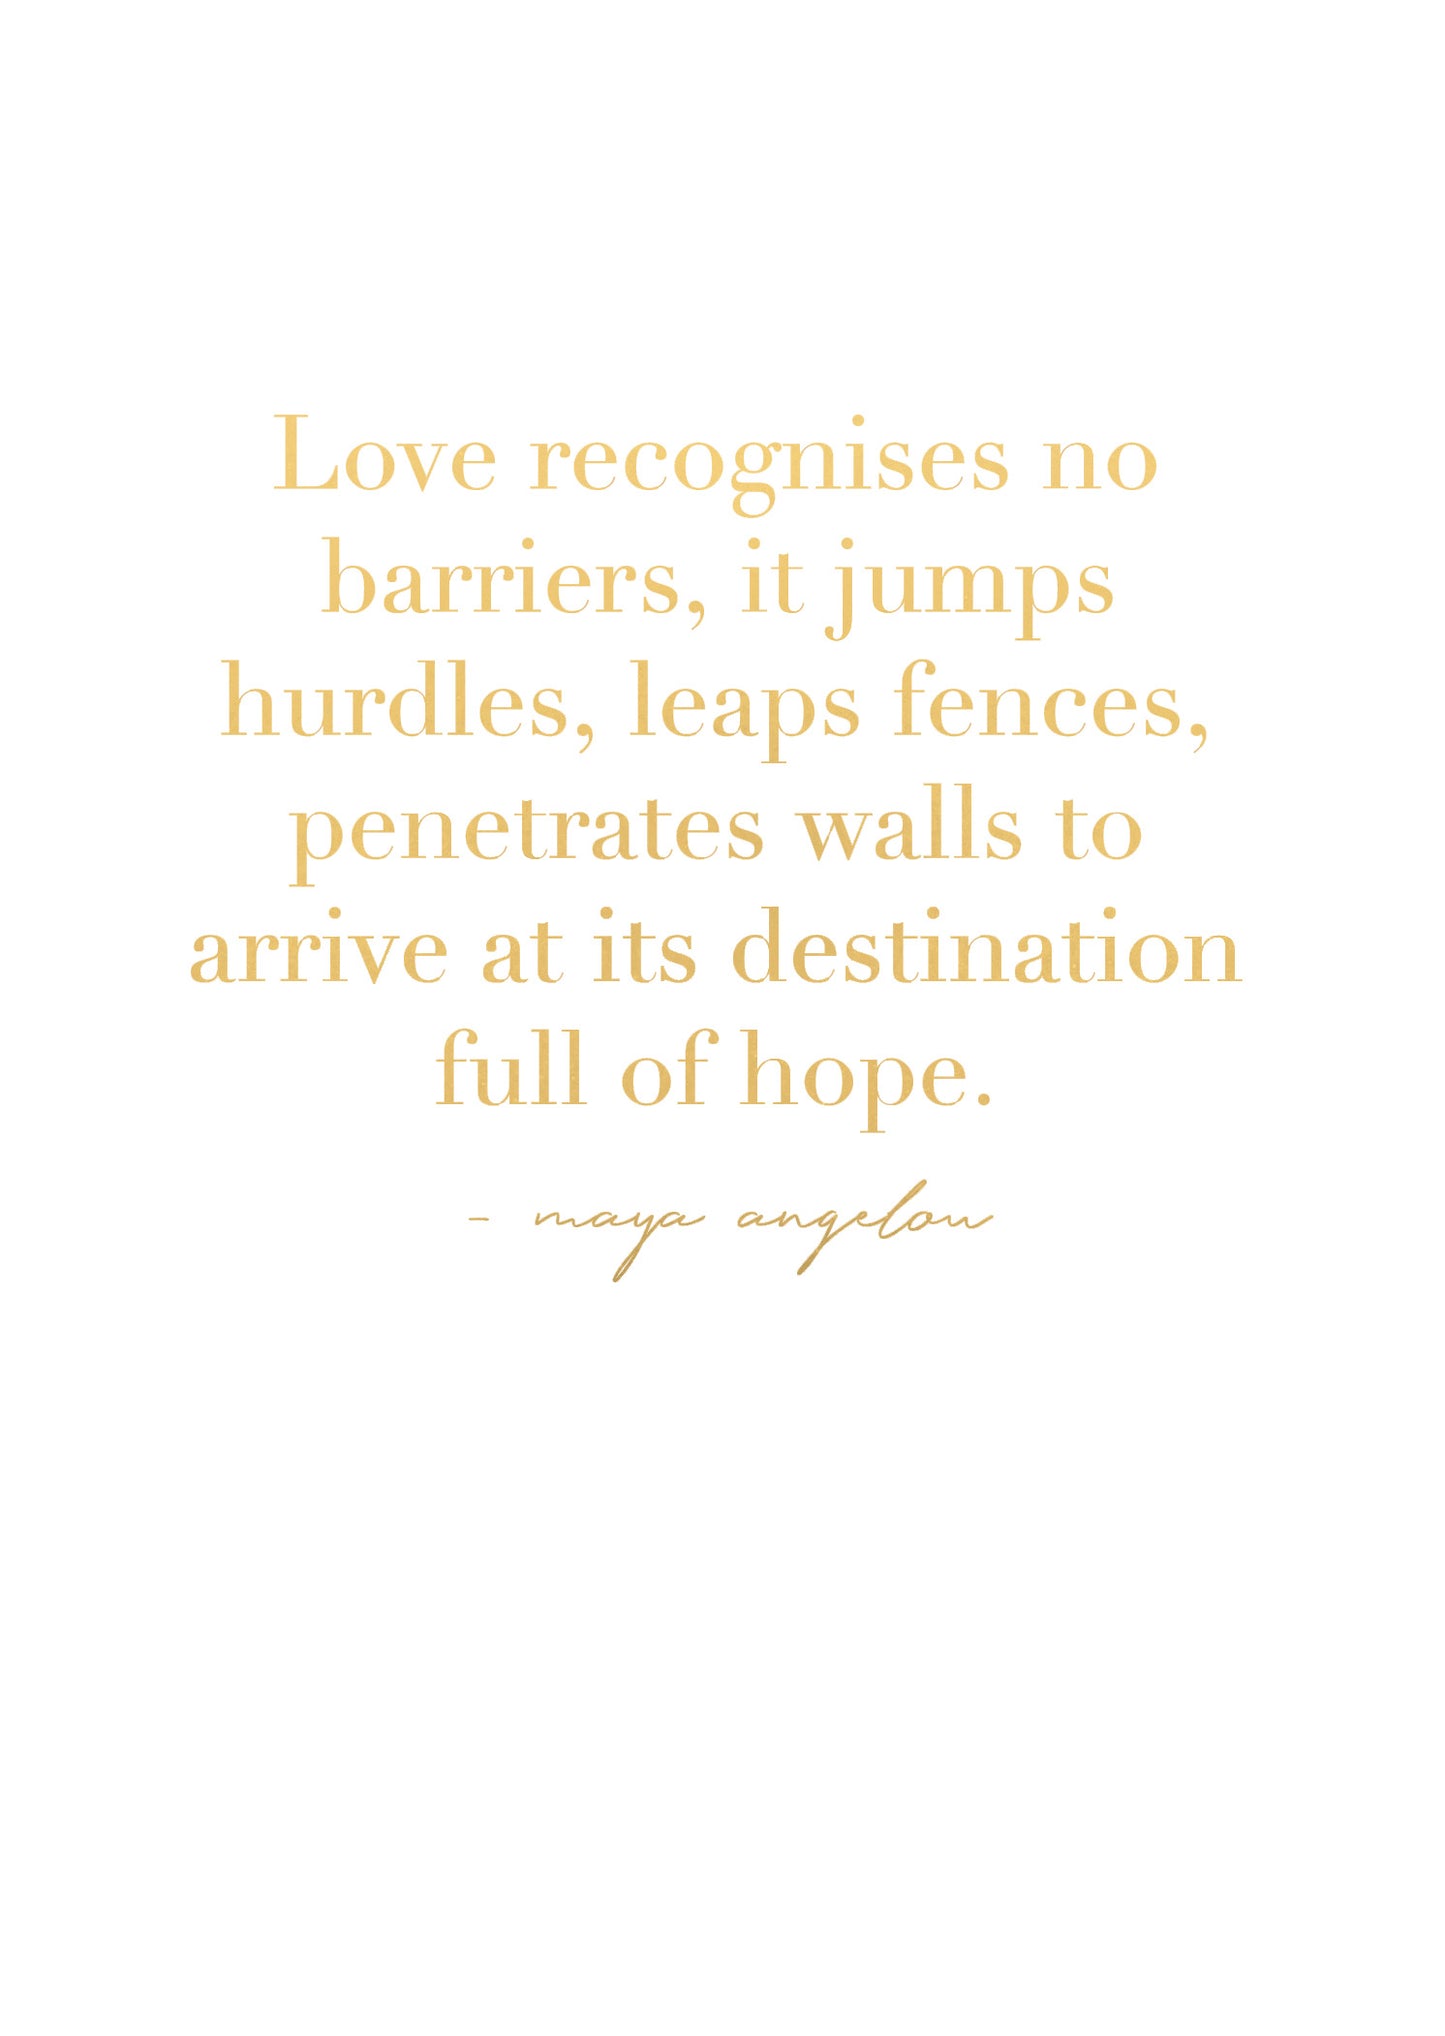 Greeting Card WEDDING - LOVE QUOTE